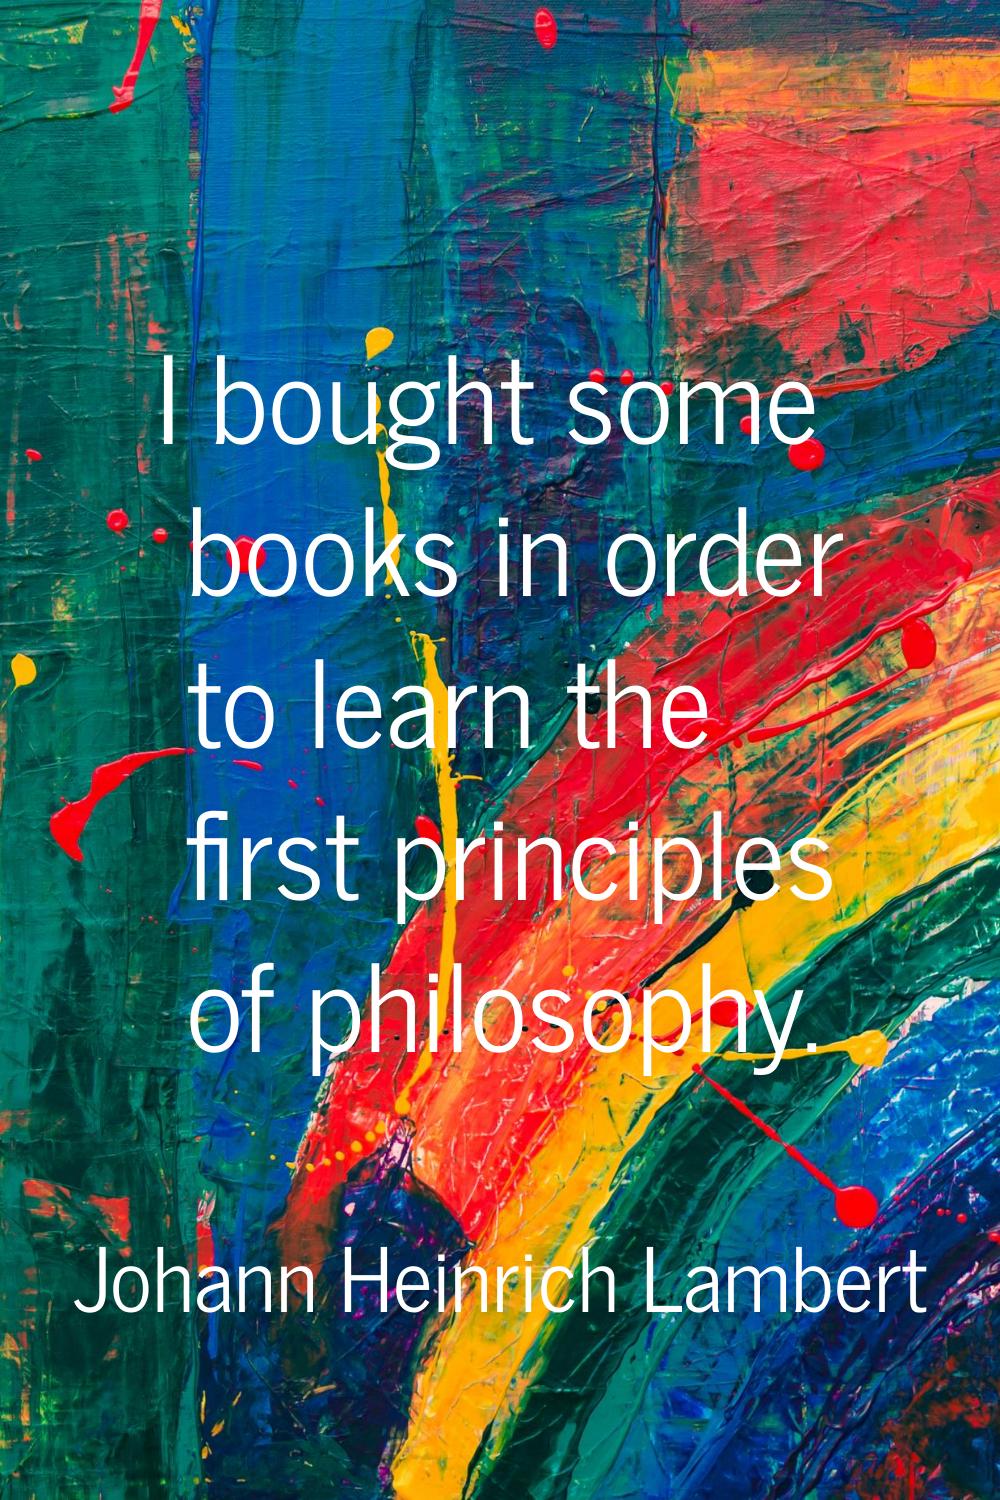 I bought some books in order to learn the first principles of philosophy.